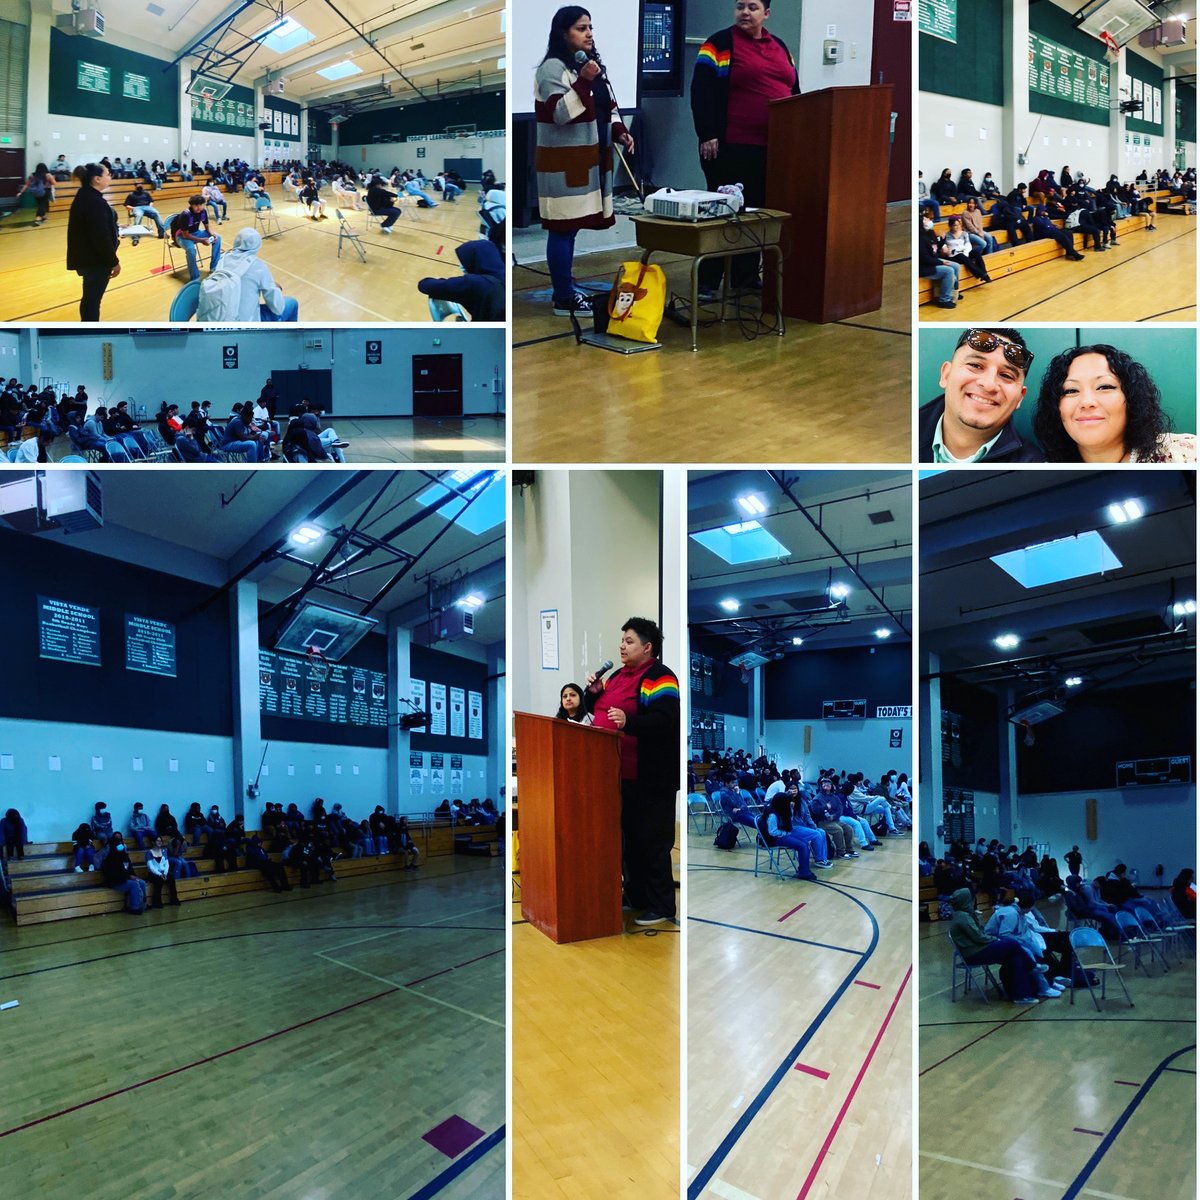 Agency/Rising World Wide- Jass and Maricruz  . Thank you for visiting our Grizzlies all day today and presenting on such an important topic (Human Trafficking). #thegrizzlyway #allmeansall #greenfieldguarantee @zjgalvan  @LCortezGUSD  @_Greenfieldrec @GUSDEdServices